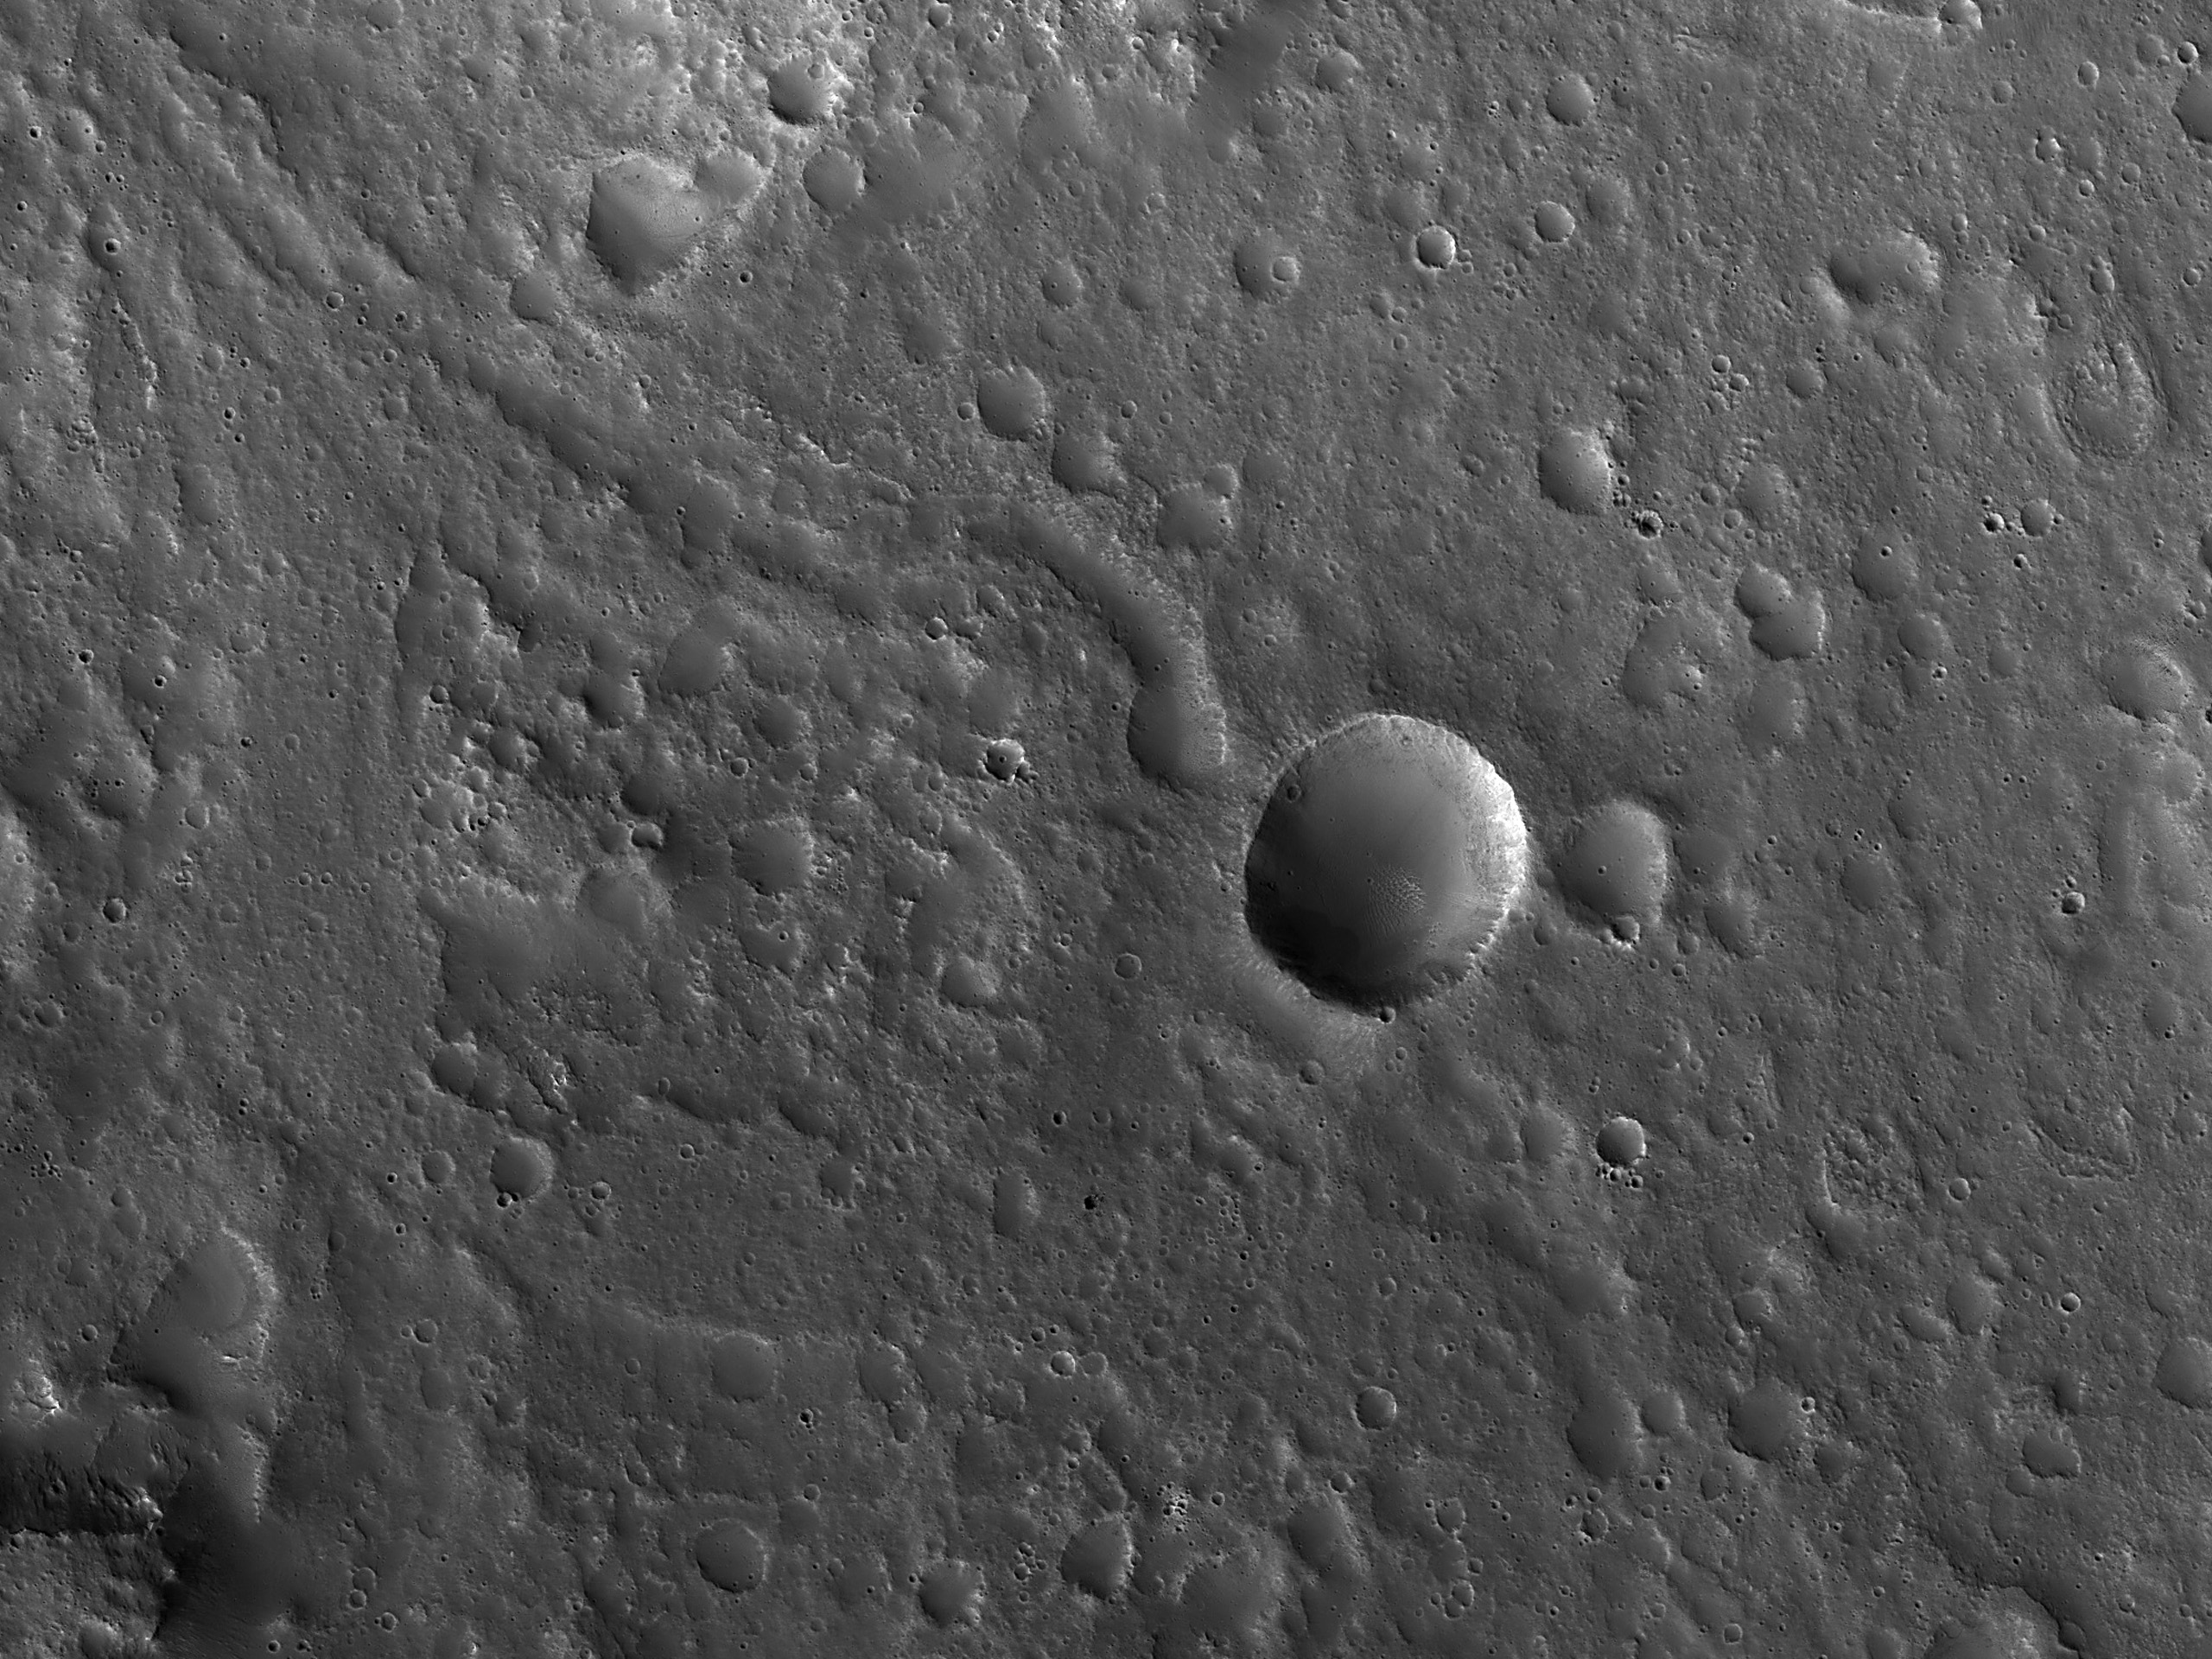 An Inverted Channel West of Idaeus Fossae